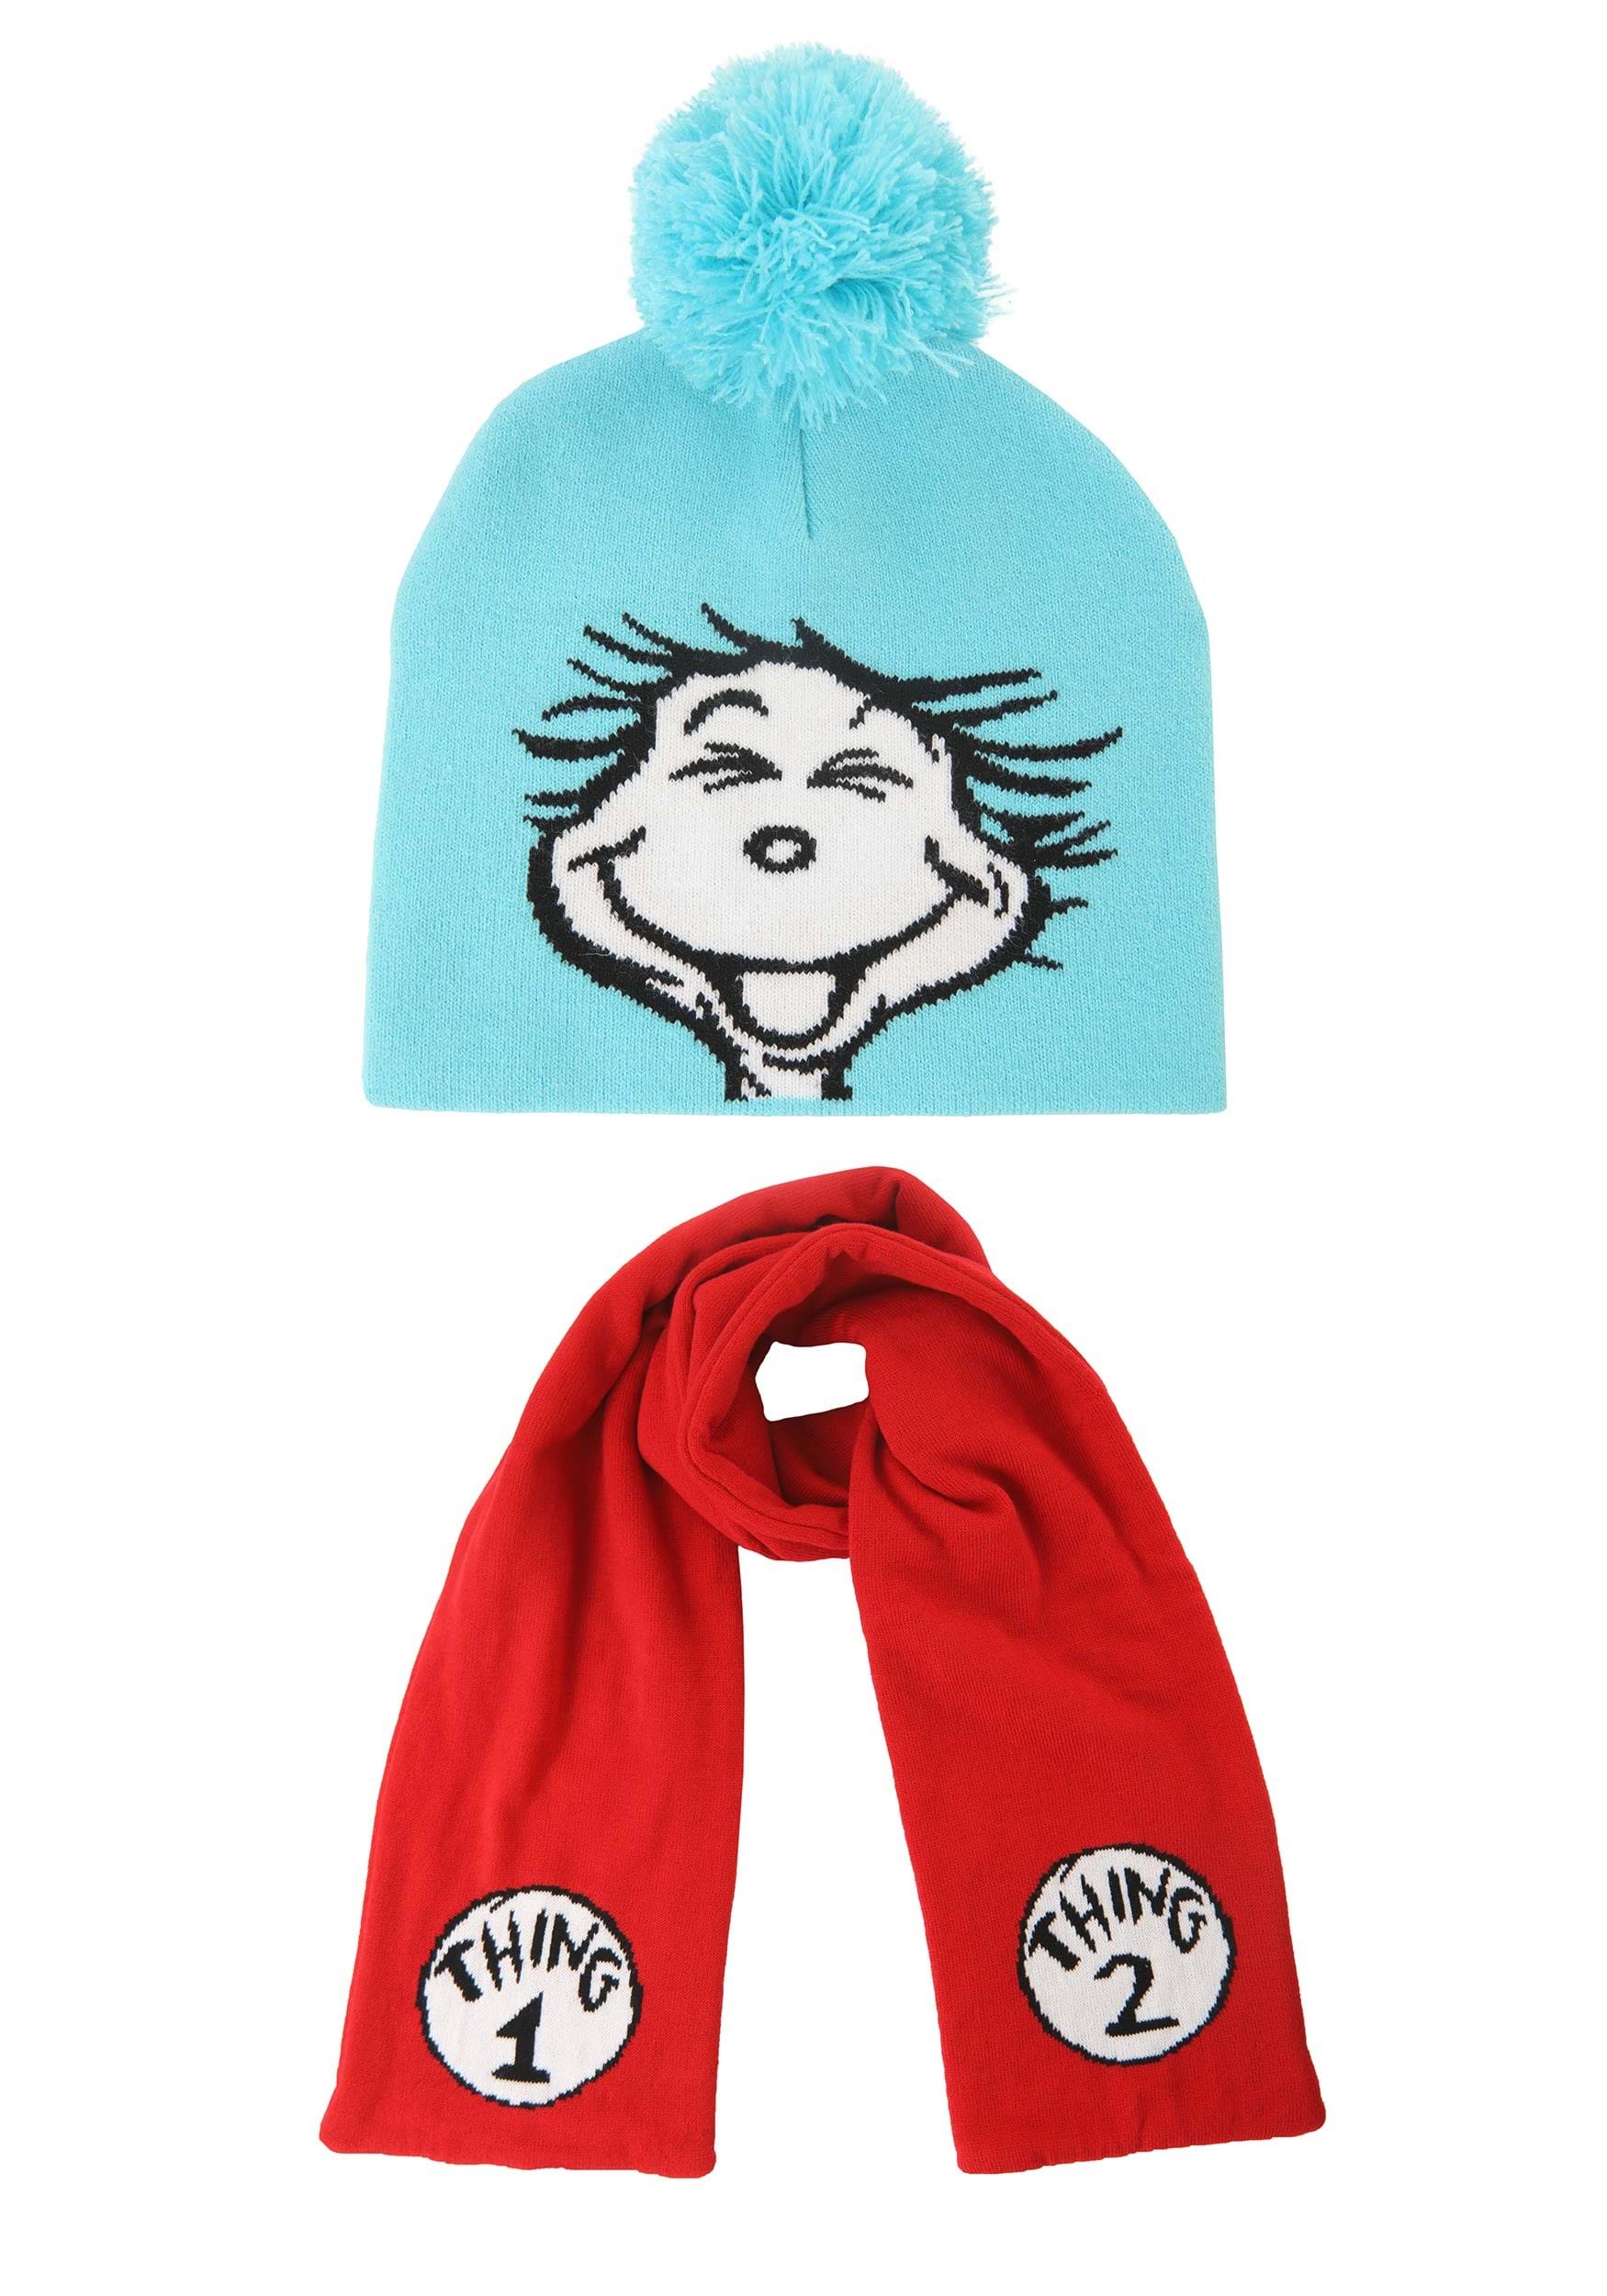 Fun Costumes Dr. Seuss Winter Hat and Scarf Kit, Adult Unisex, Size: One size, Red